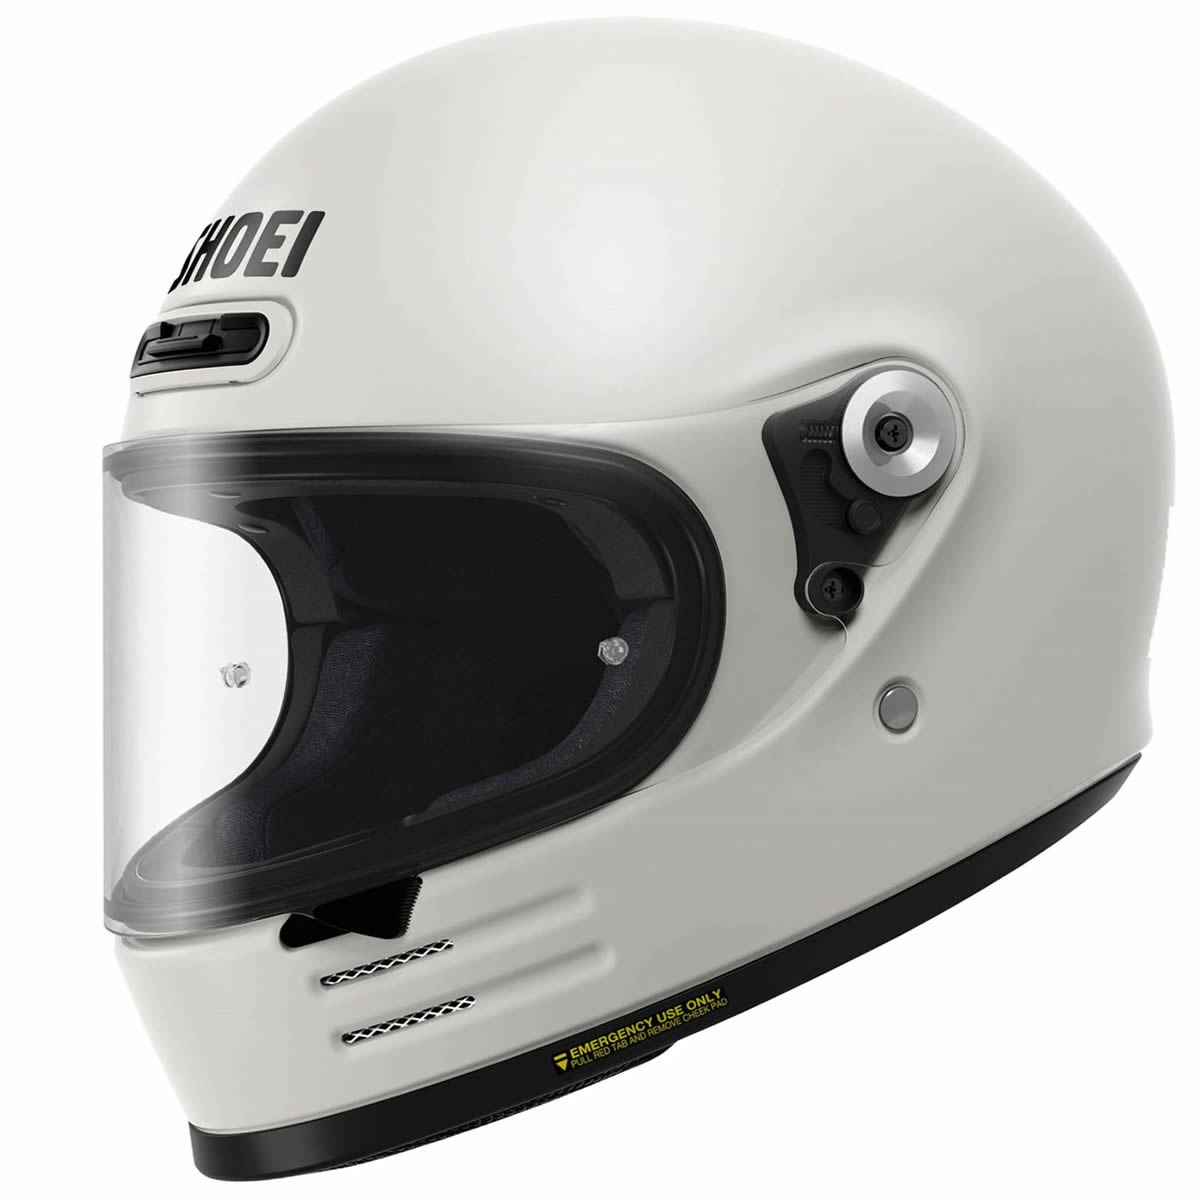 Shoei Helm Glamster 06, weiss